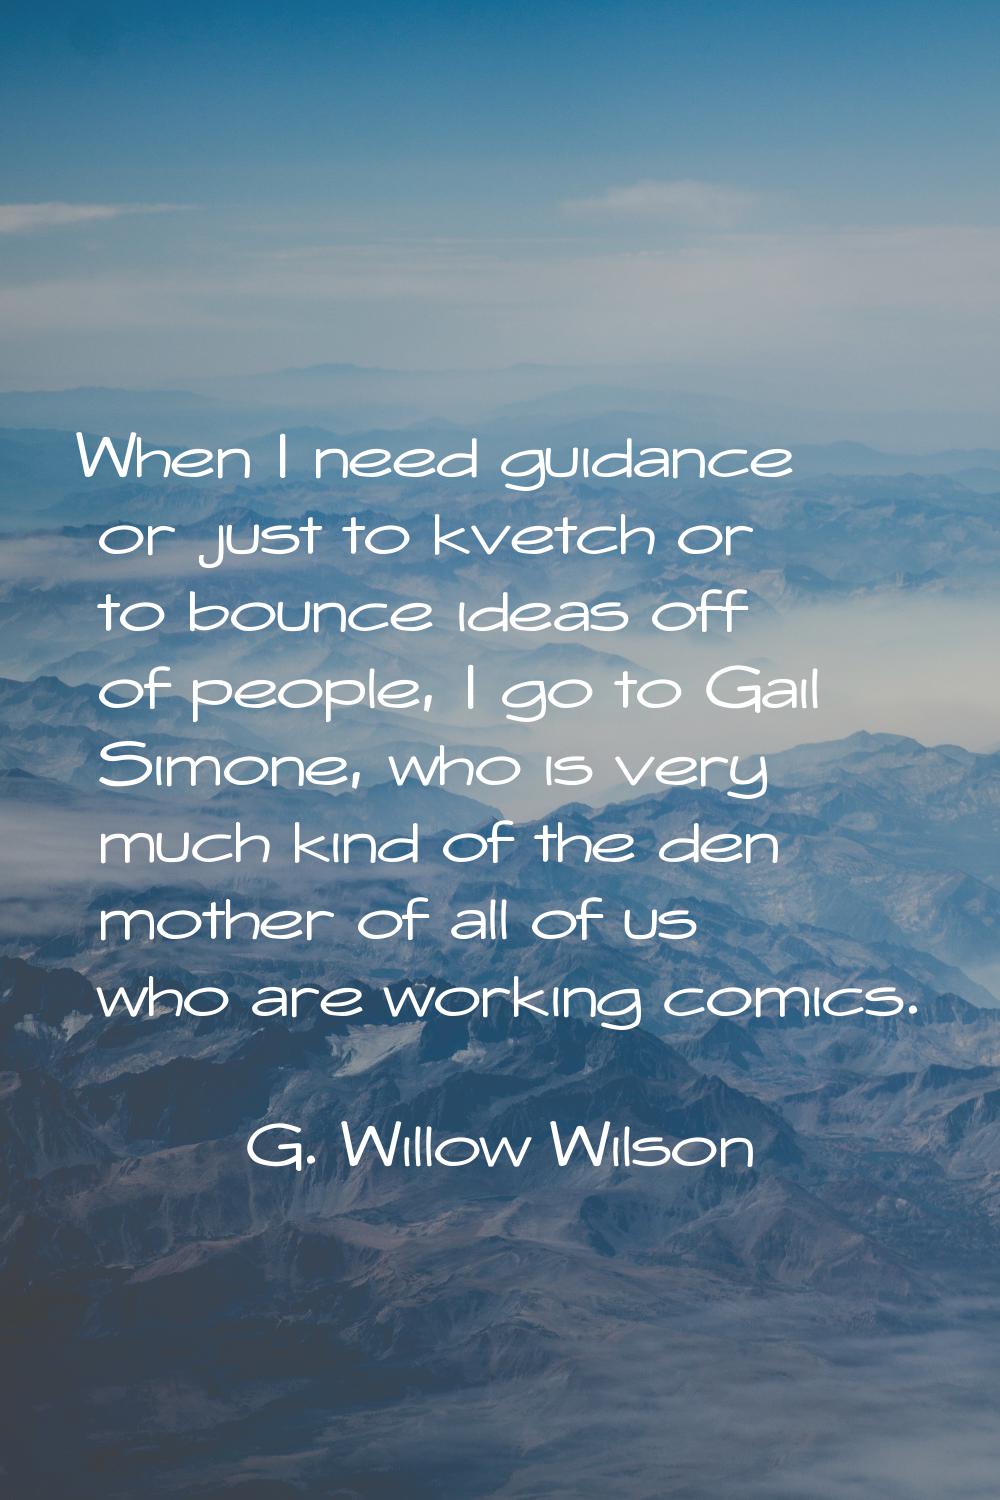 When I need guidance or just to kvetch or to bounce ideas off of people, I go to Gail Simone, who i